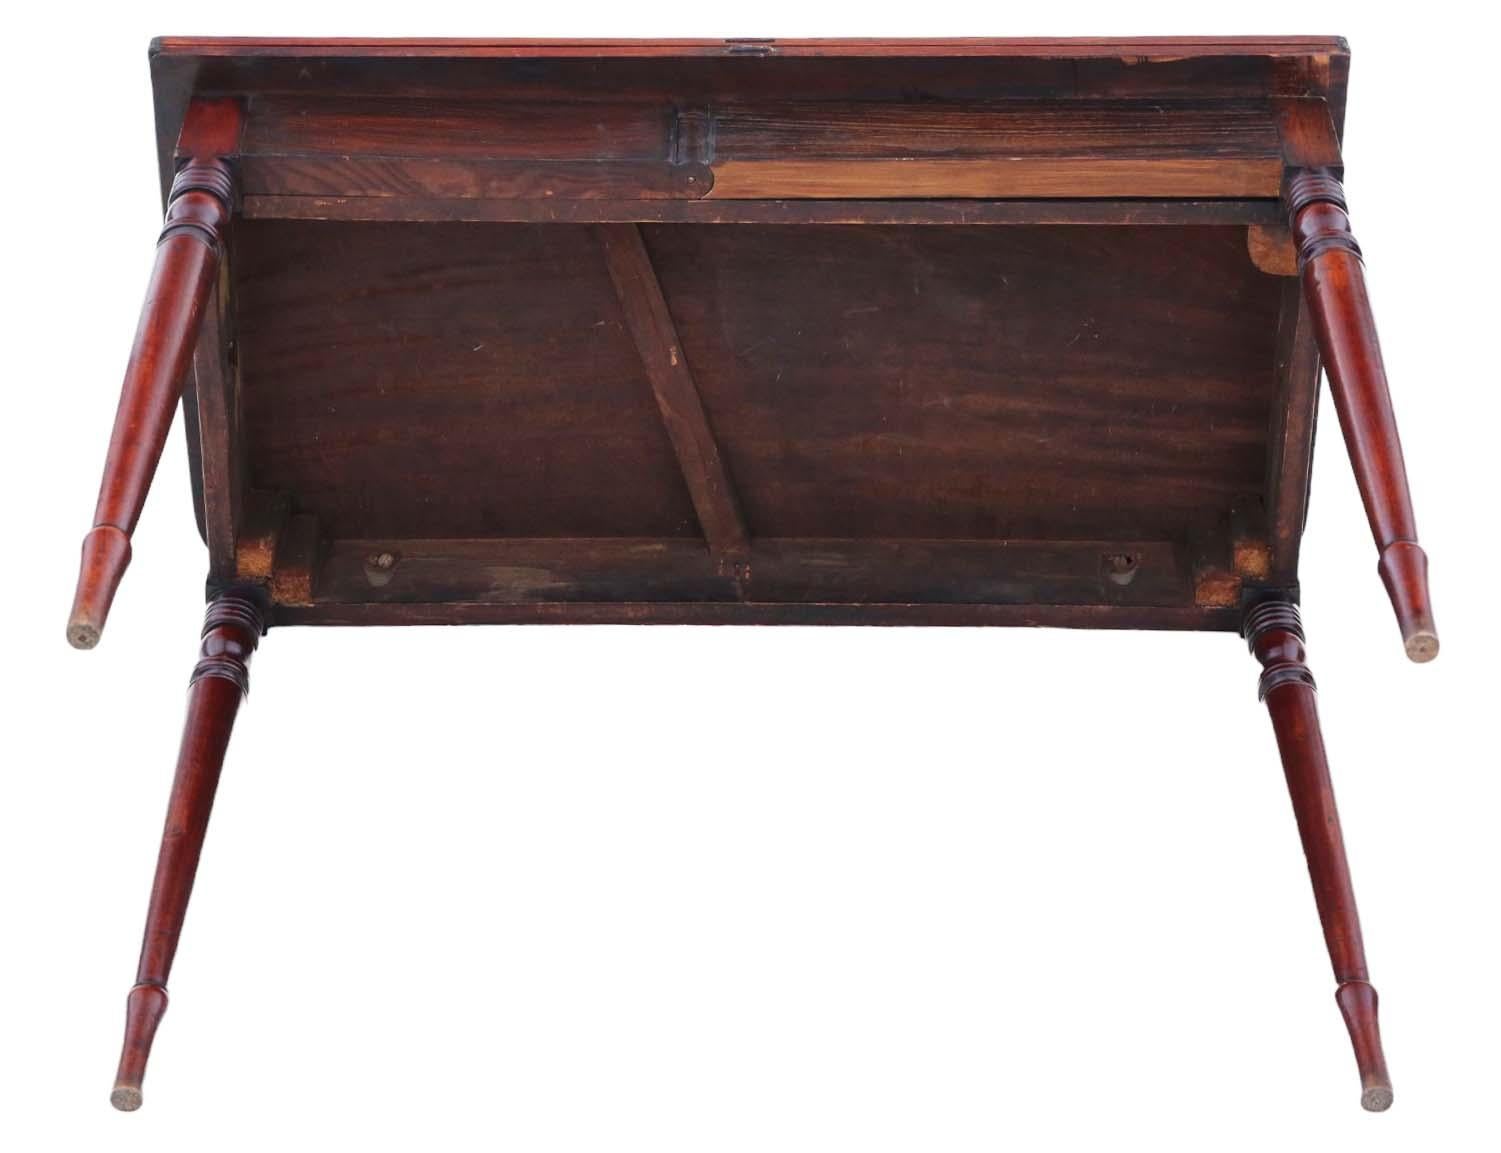 Antique Fine Quality C1800 Inlaid Mahogany Folding Card or Tea Table - Side For Sale 5